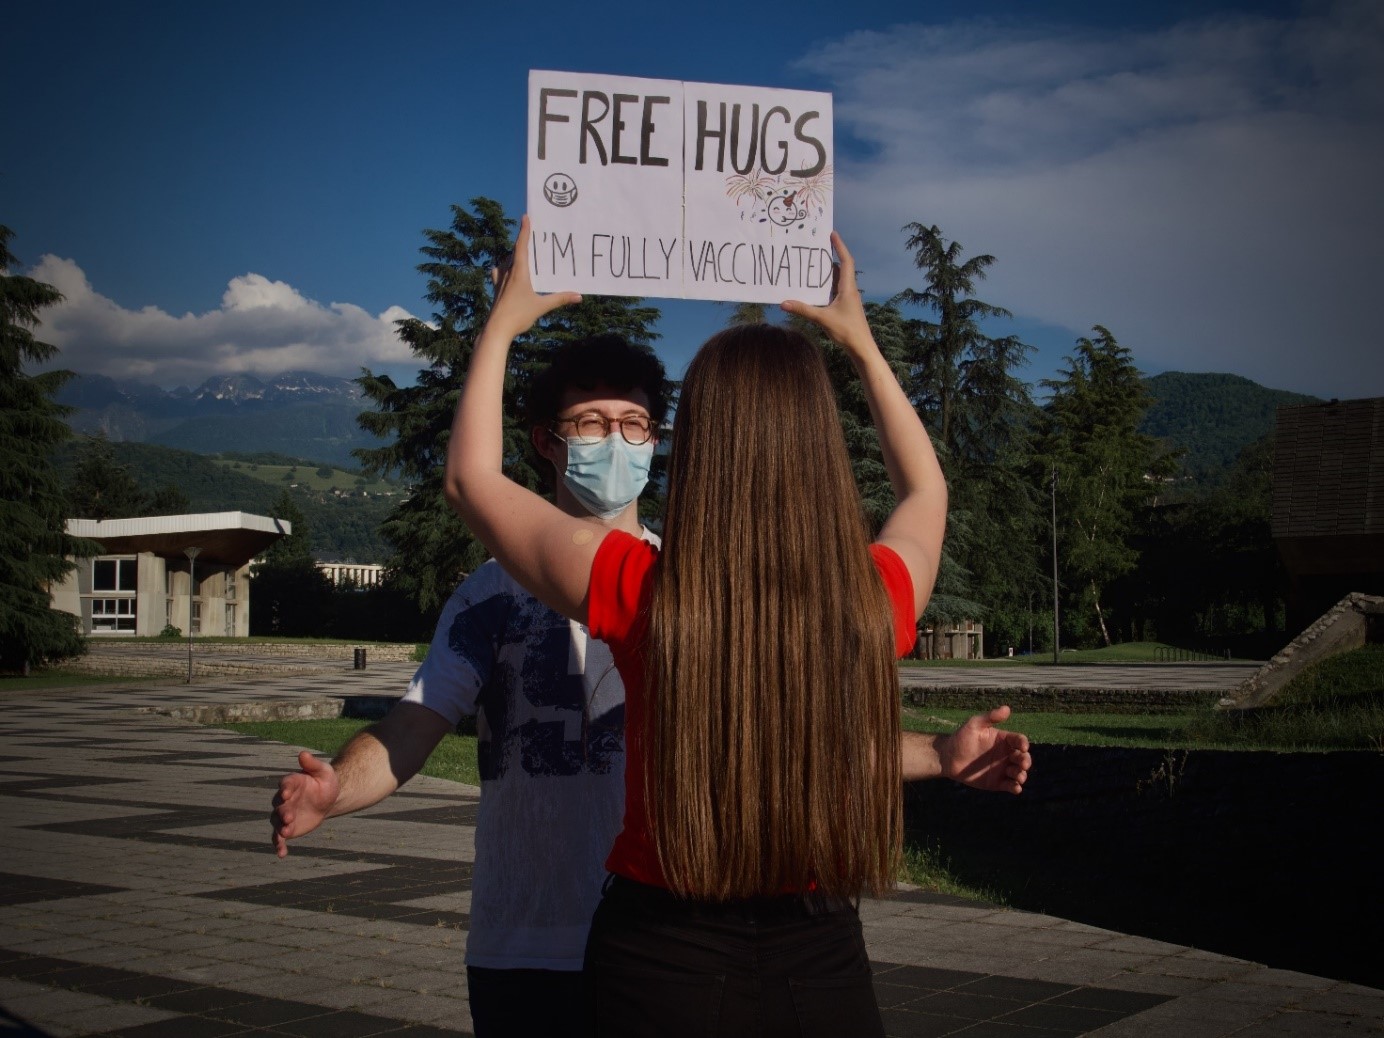 Free Hugs, I'm fully vaccinated